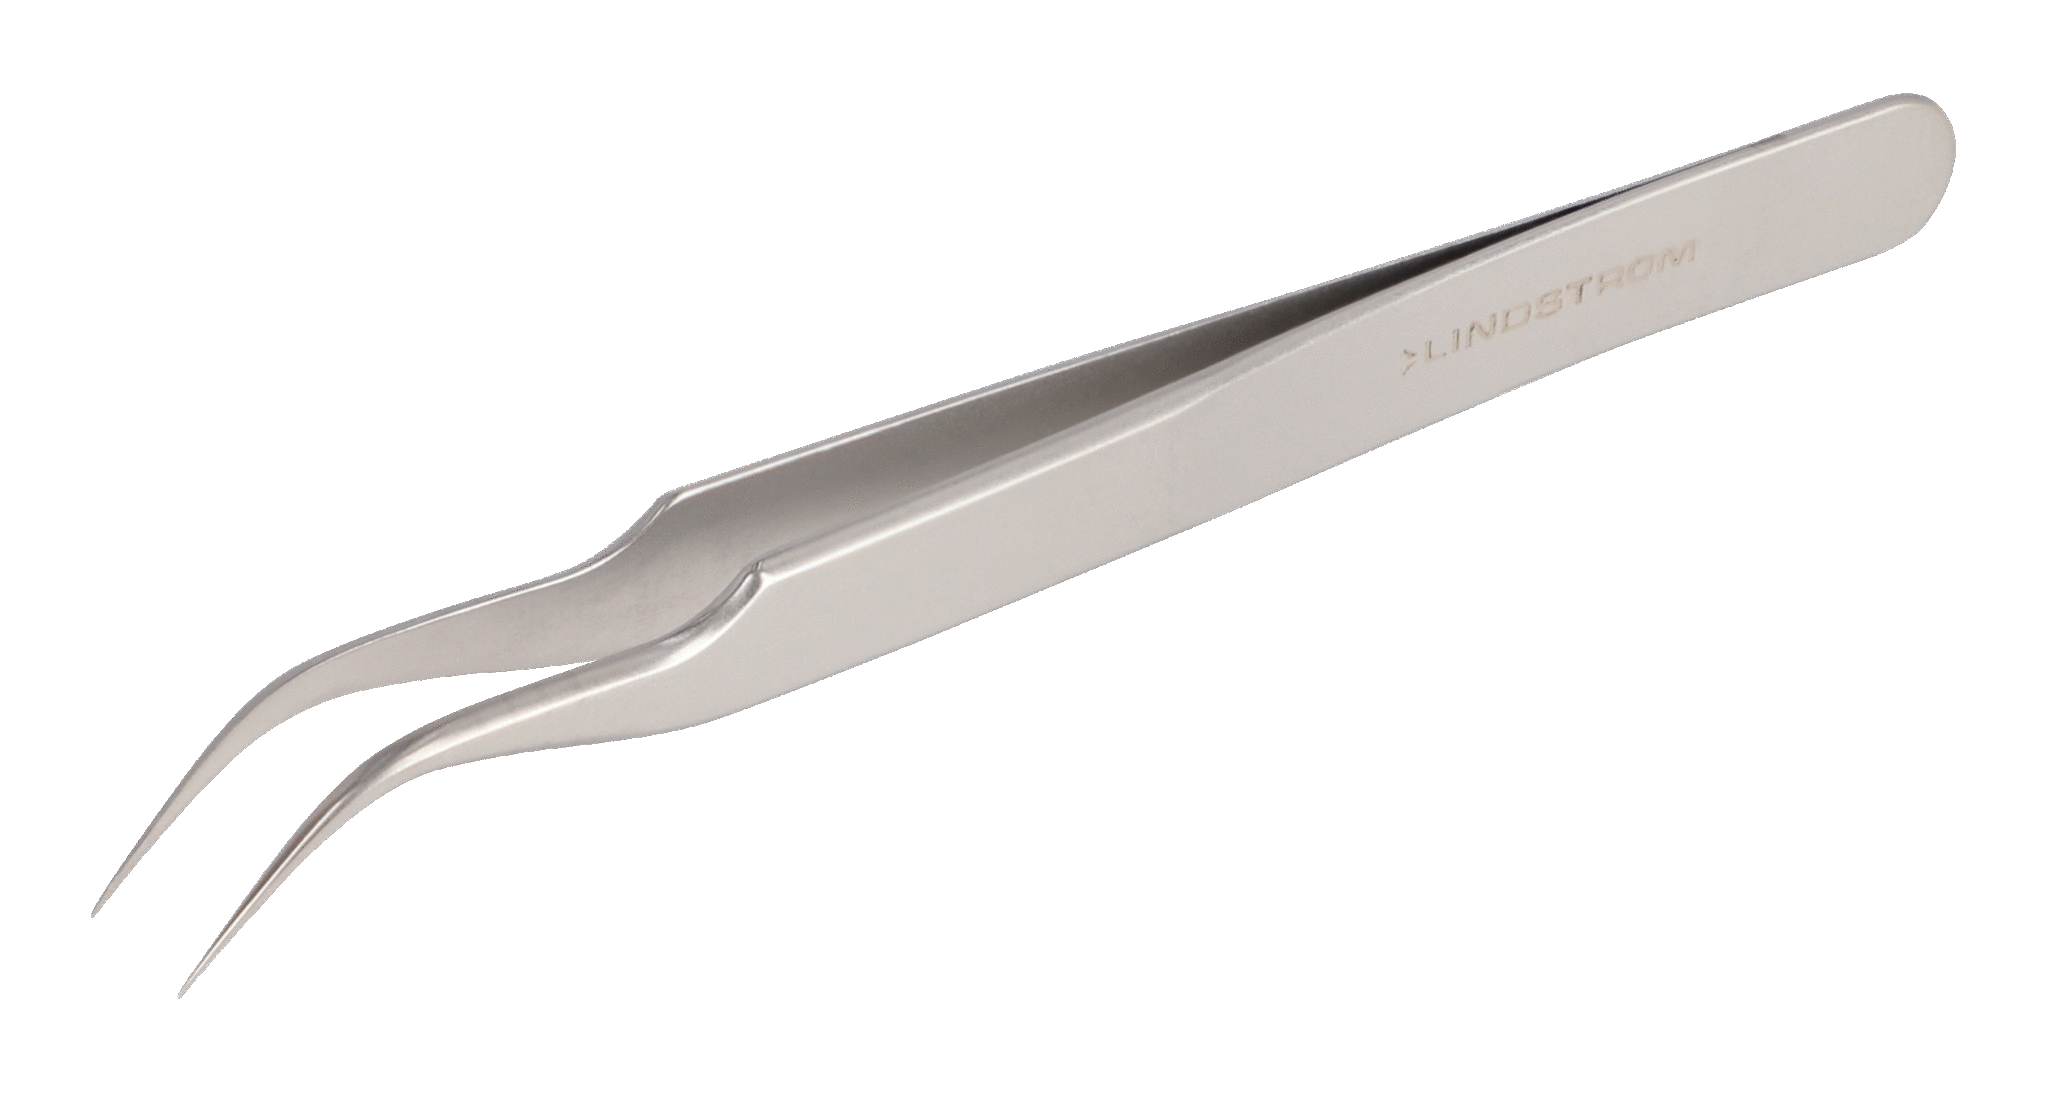 Stainless Steel High Precision Tweezers Style 7 with Very Fine and Curved  Tips